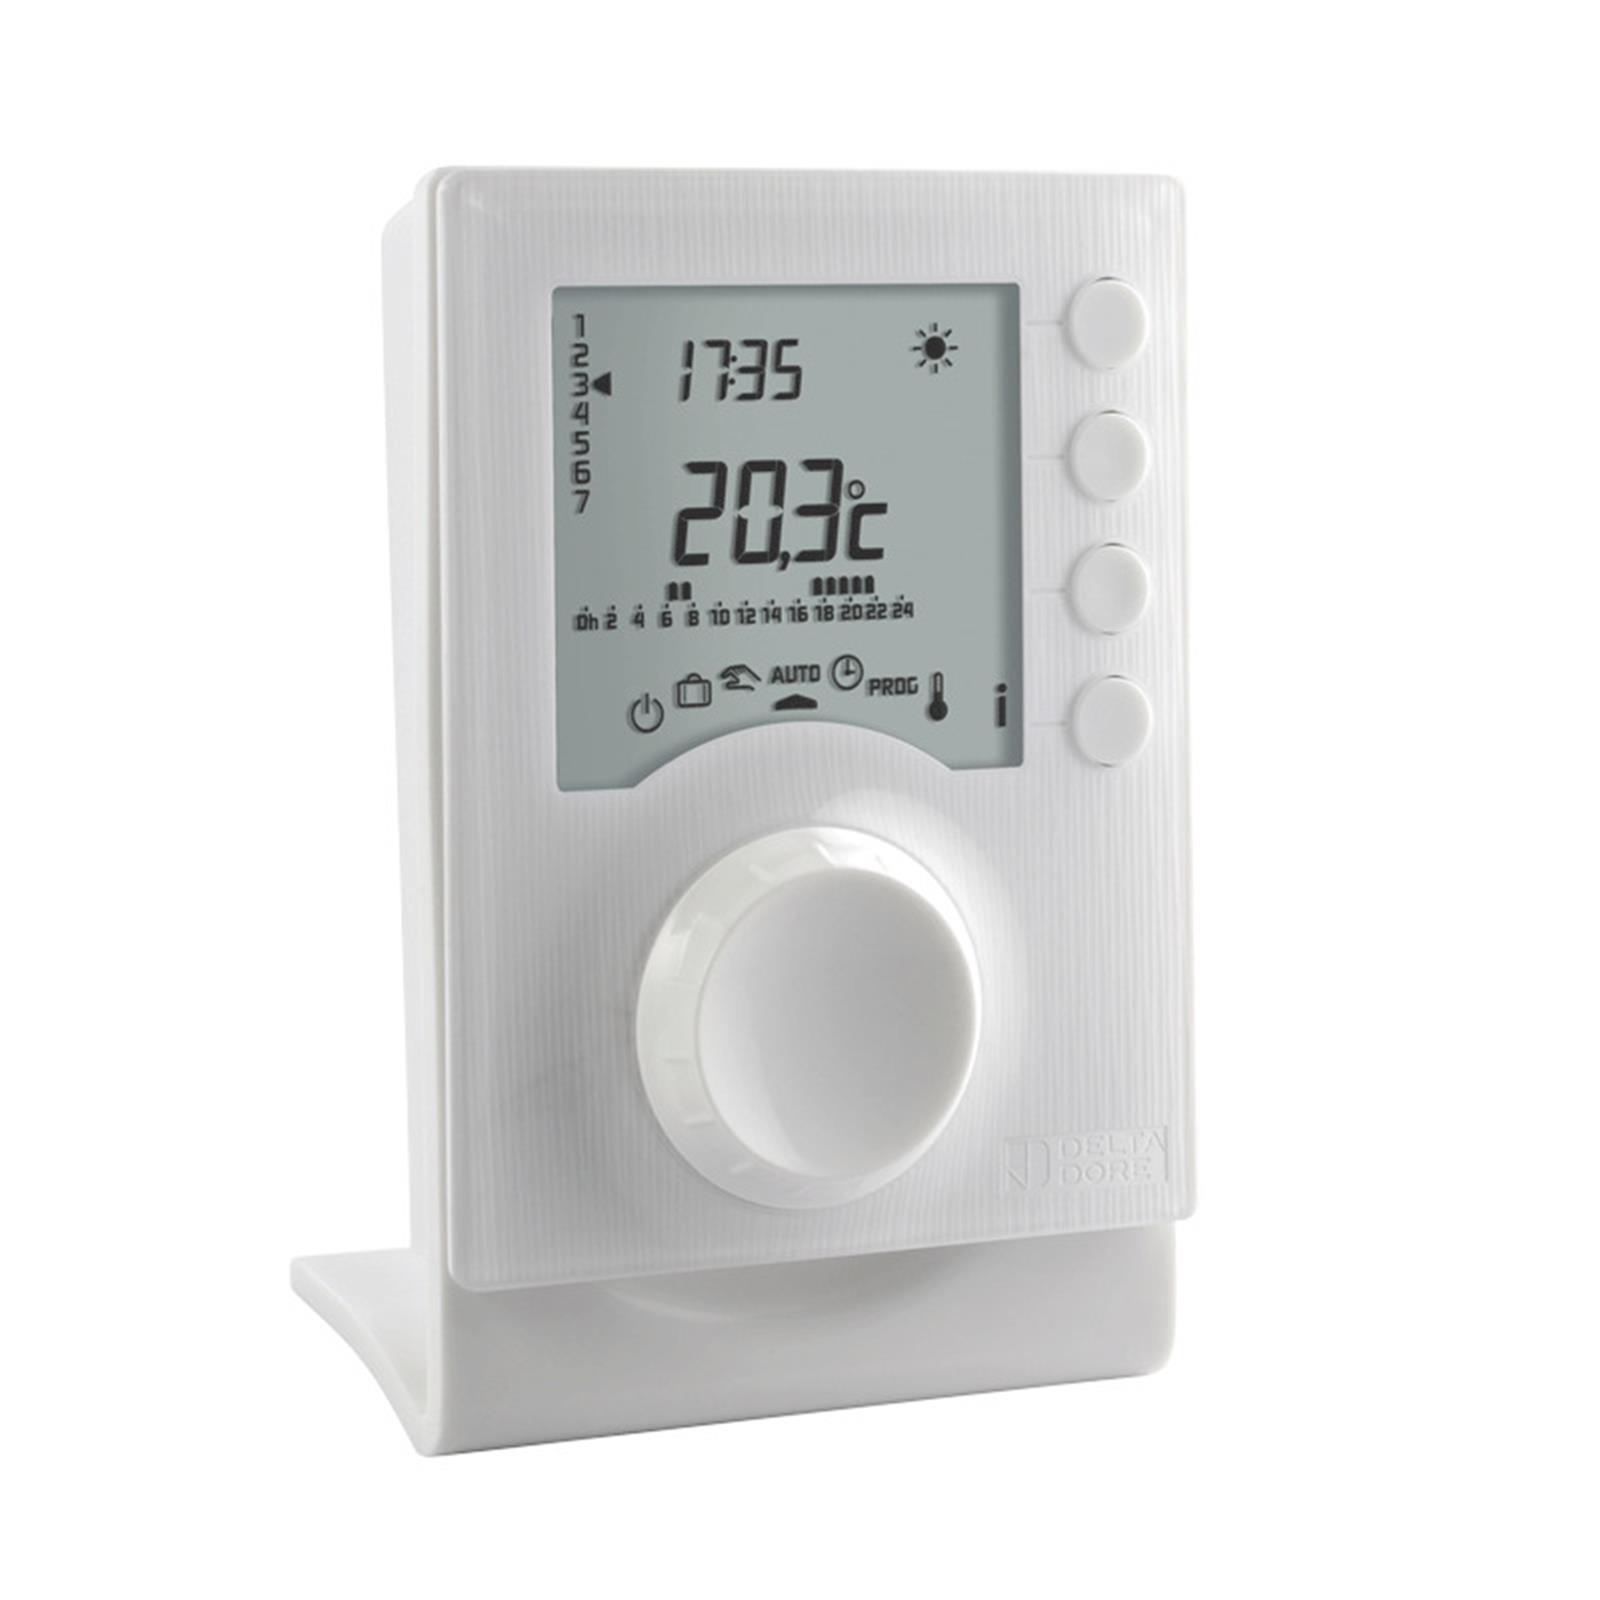 Thermostat programmable radio pour chauffage eau chaude - Alimentation piles - TYBOX 1137 - TYBOX 11